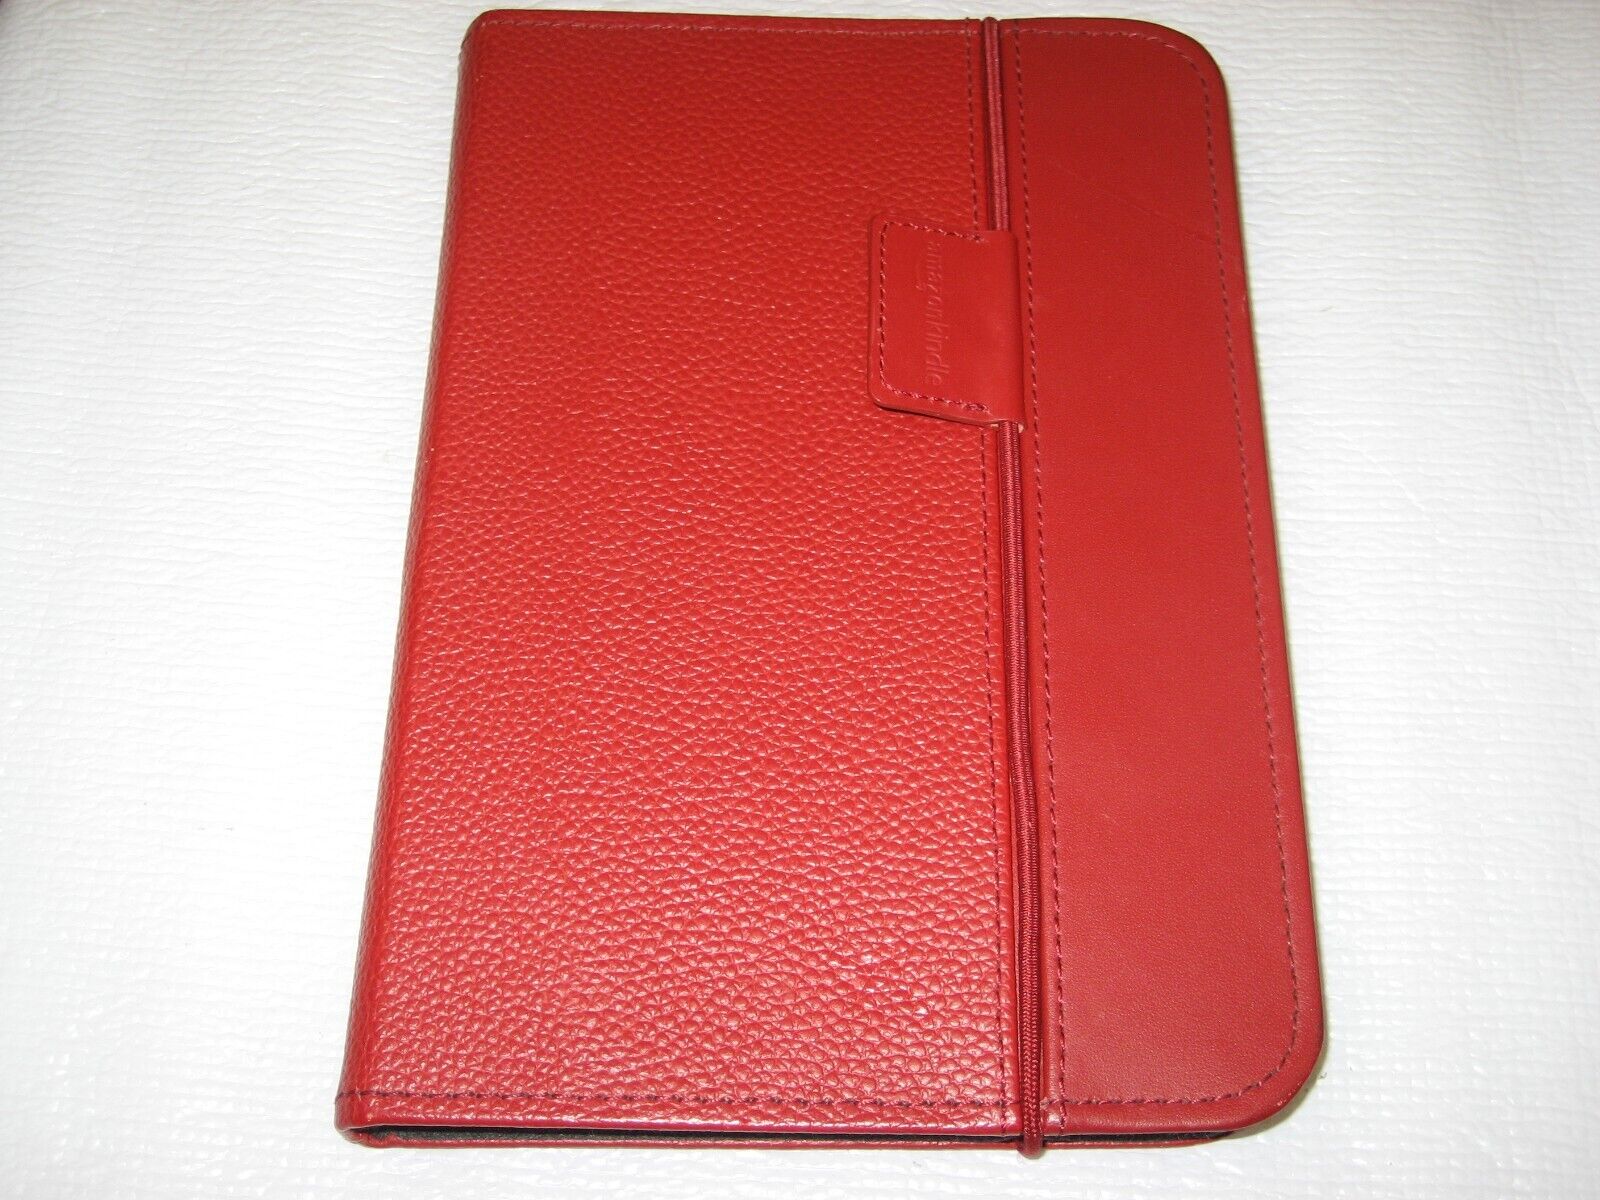 Original Amazon Leather Cover Case w/ Light for Kindle Keyboard 3 3rd Gen - Red